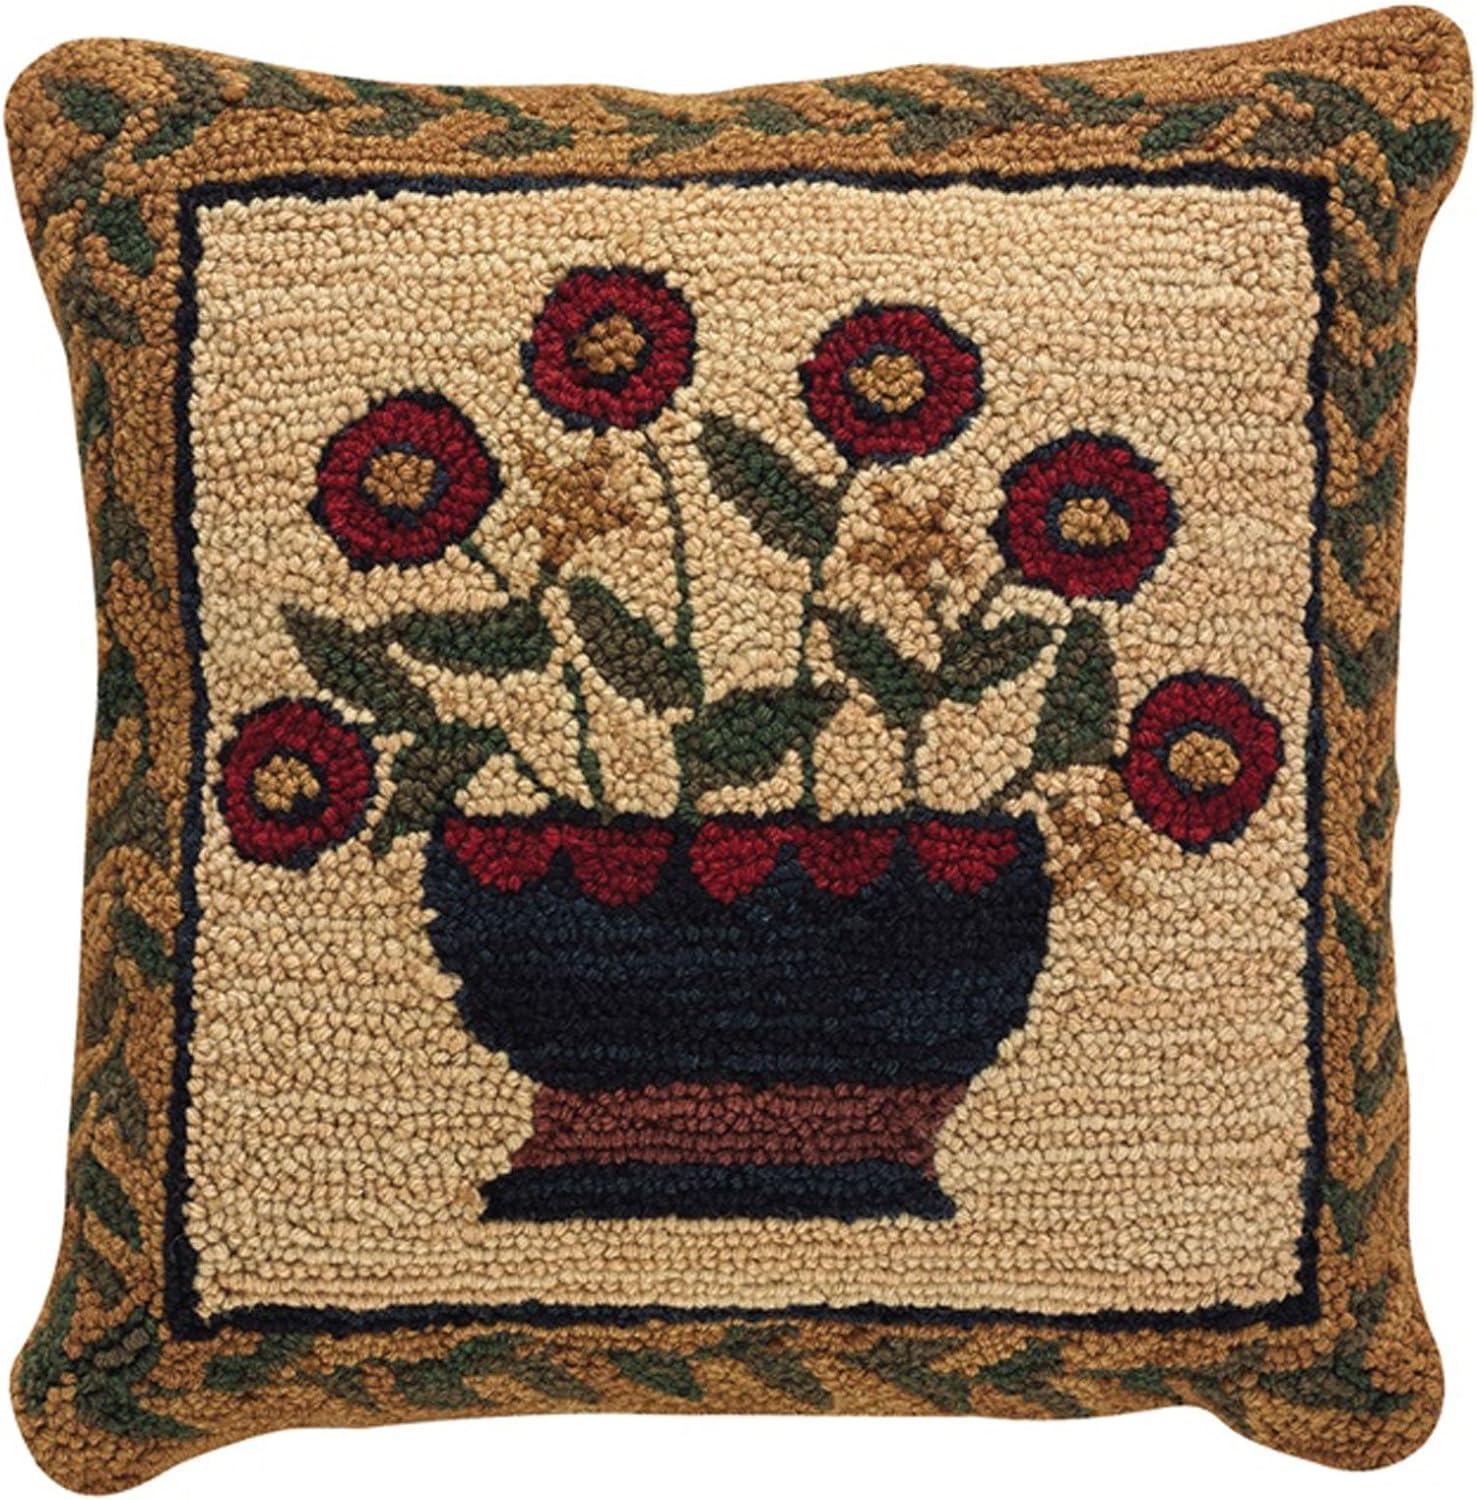 Floral Basket 14"x16" Hand-Hooked Cotton-Polyester Pillow Cover